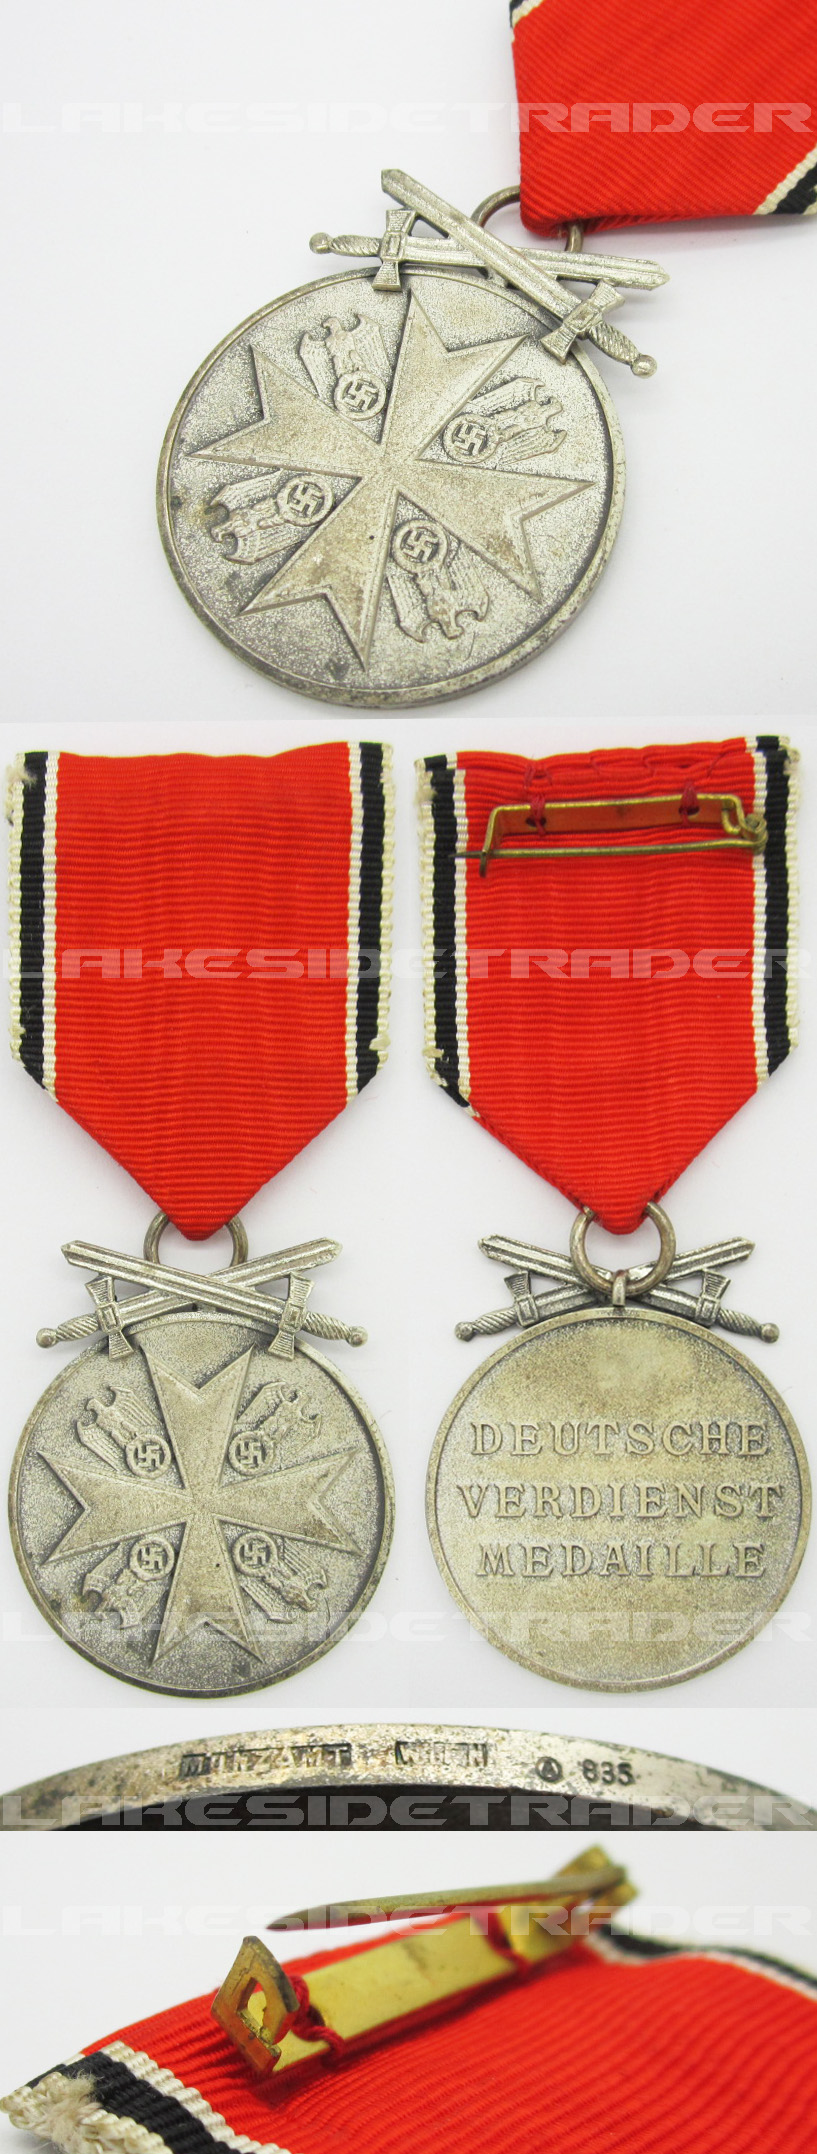 Order of the German Eagle Silver Medal of Merit with Swords